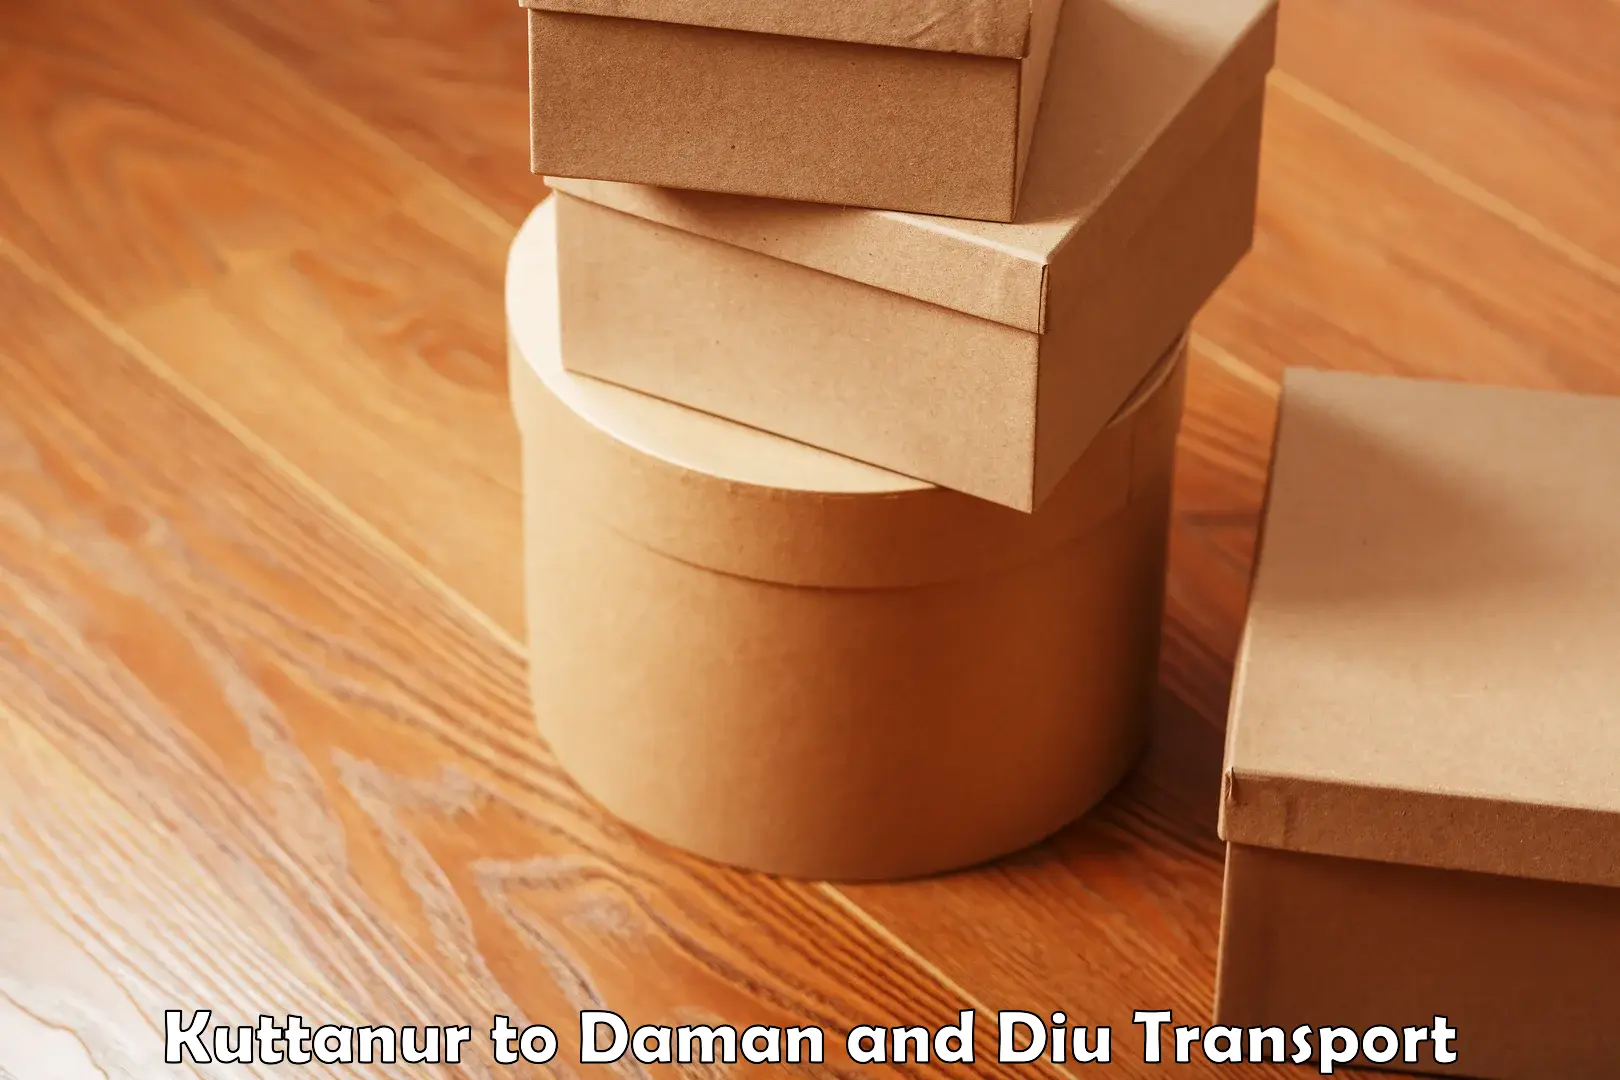 Truck transport companies in India Kuttanur to Daman and Diu